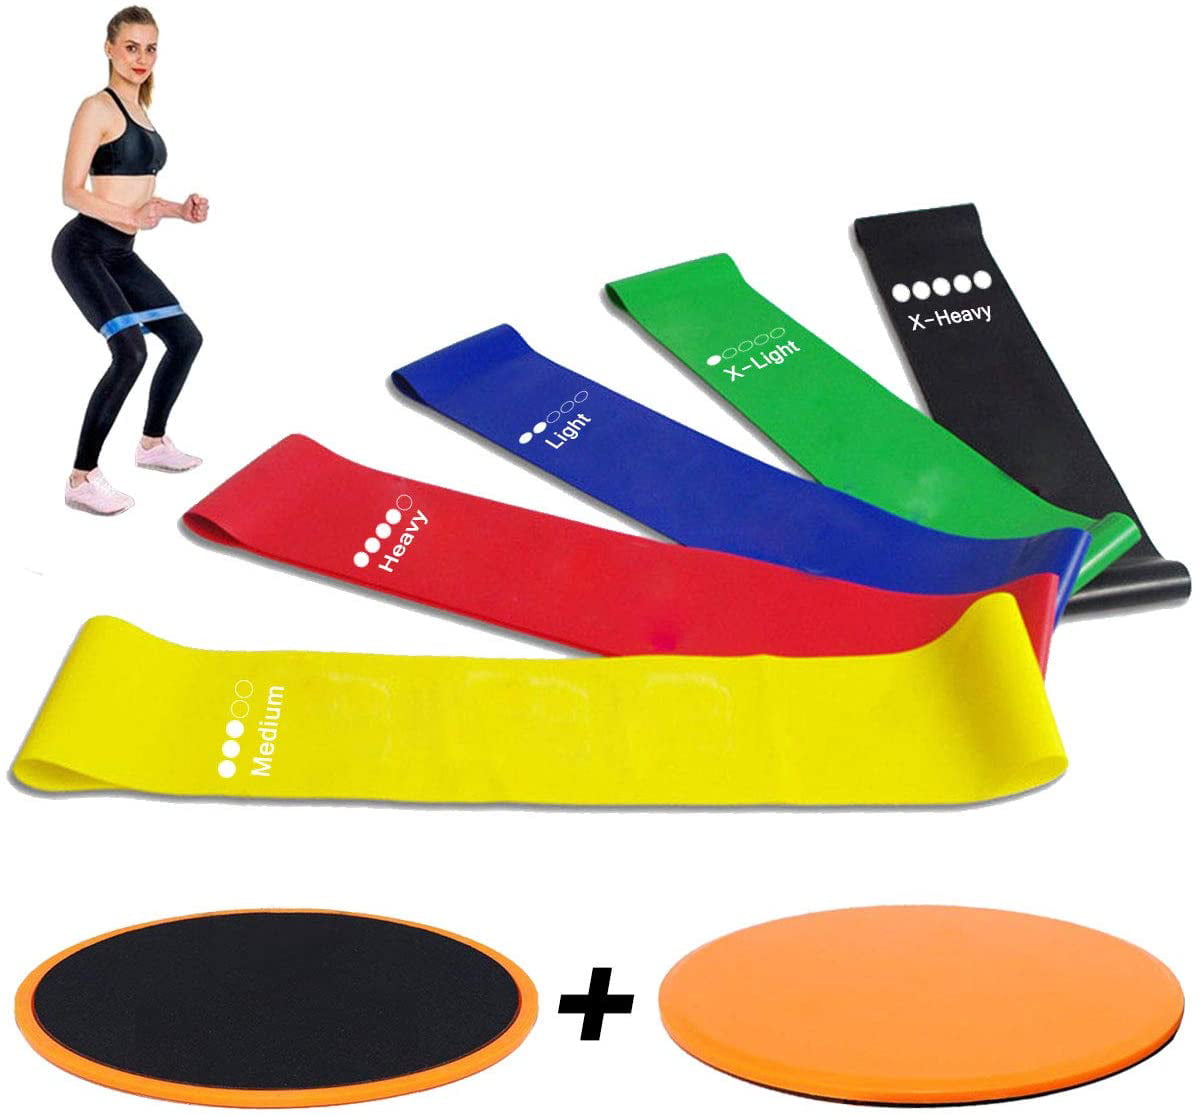 5 Resistance Exercise Bands Mini Loop Set Latex Glutes Pull Up Home Gym Fitness 